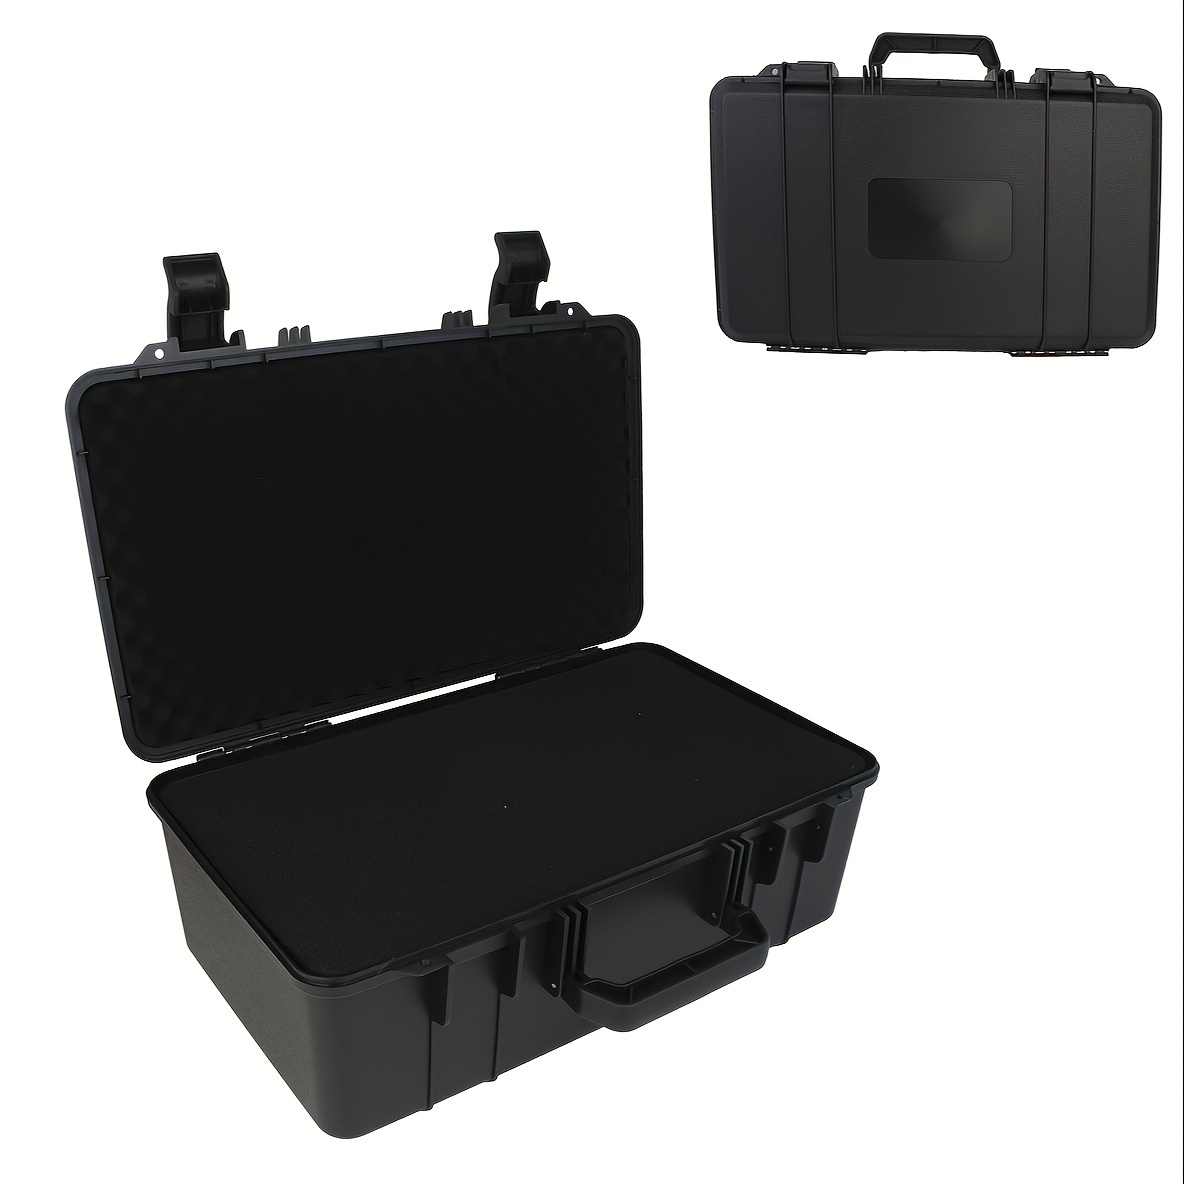 Three Layers Fold Tool Box Waterproof Safety Case Shockproof